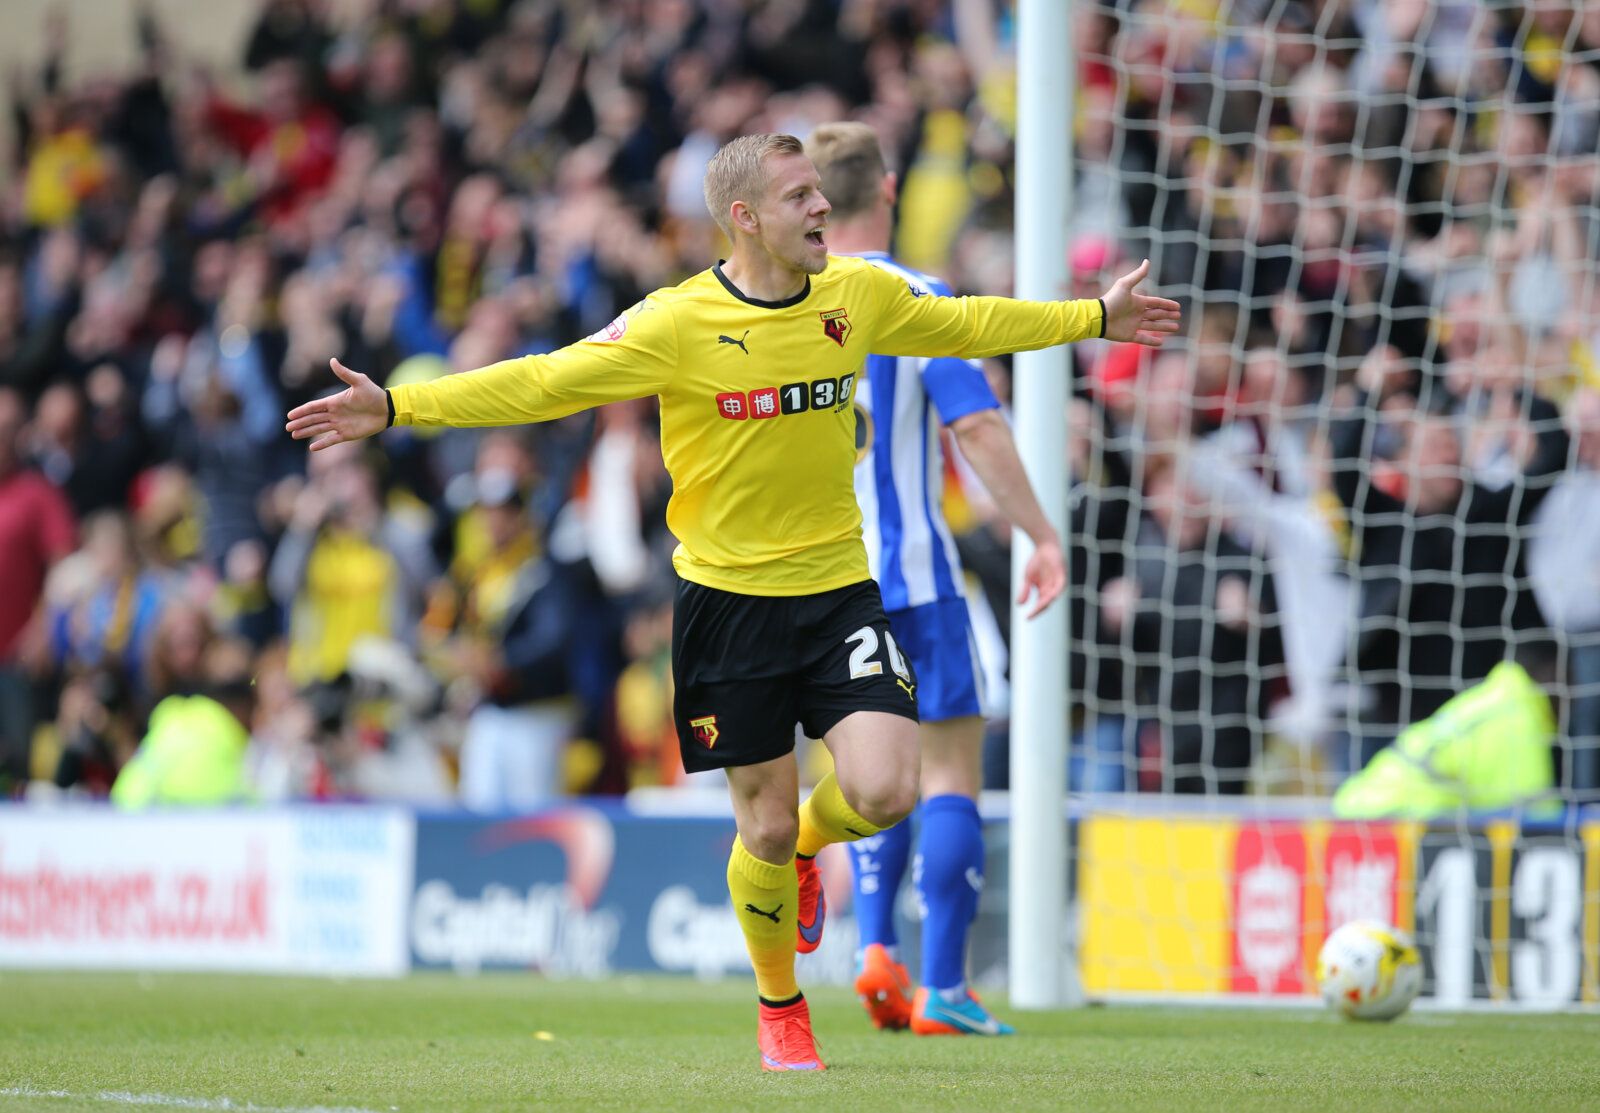 Football - Watford v Sheffield Wednesday - Sky Bet Football League Championship - Vicarage Road - 2/5/15
Matej Vydra celebrates scoring the first goal for Watford 
Action Images via Reuters / Paul Childs
Livepic
EDITORIAL USE ONLY. No use with unauthorized audio, video, data, fixture lists, club/league logos or 